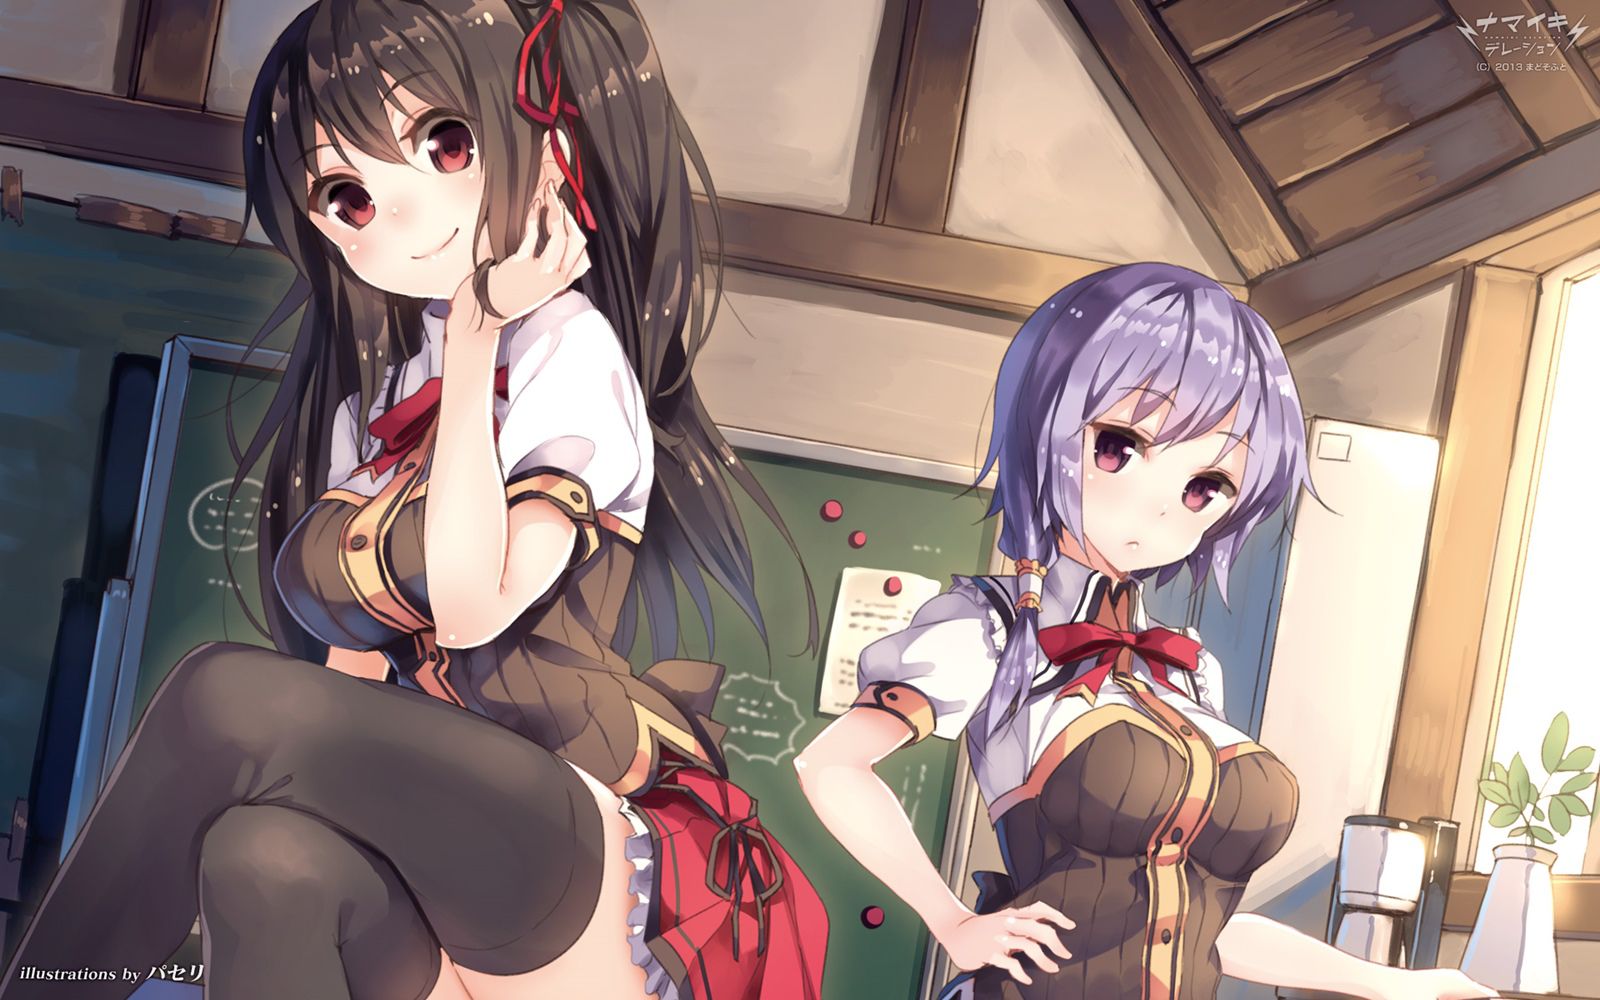 Namickideration [under age 18 prohibited eroge CG] wallpapers, images 5